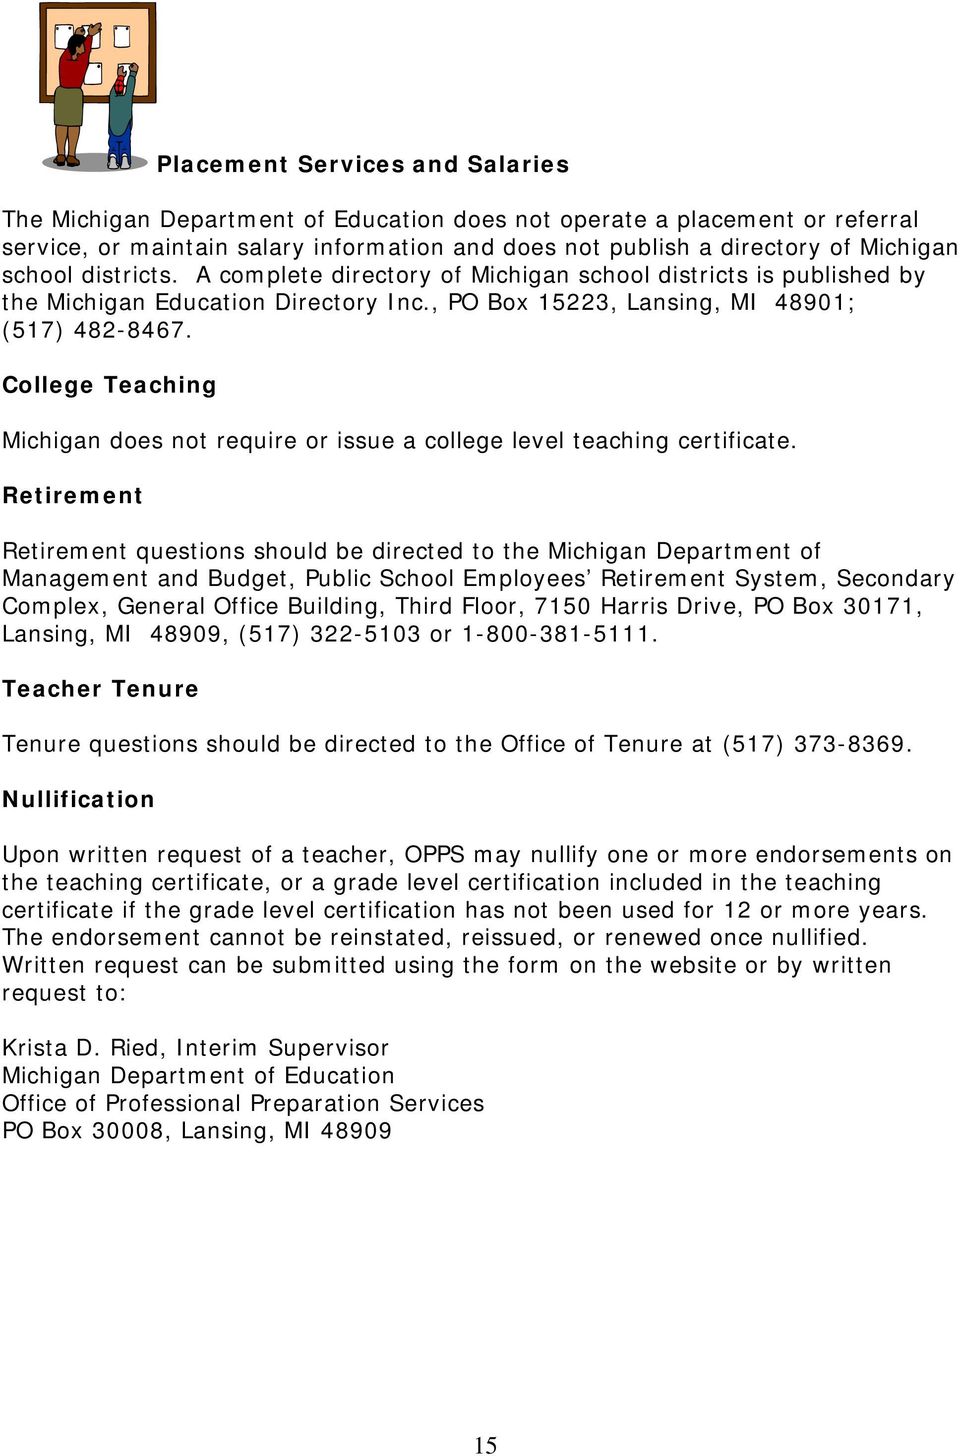 College Teaching Michigan does not require or issue a college level teaching certificate.